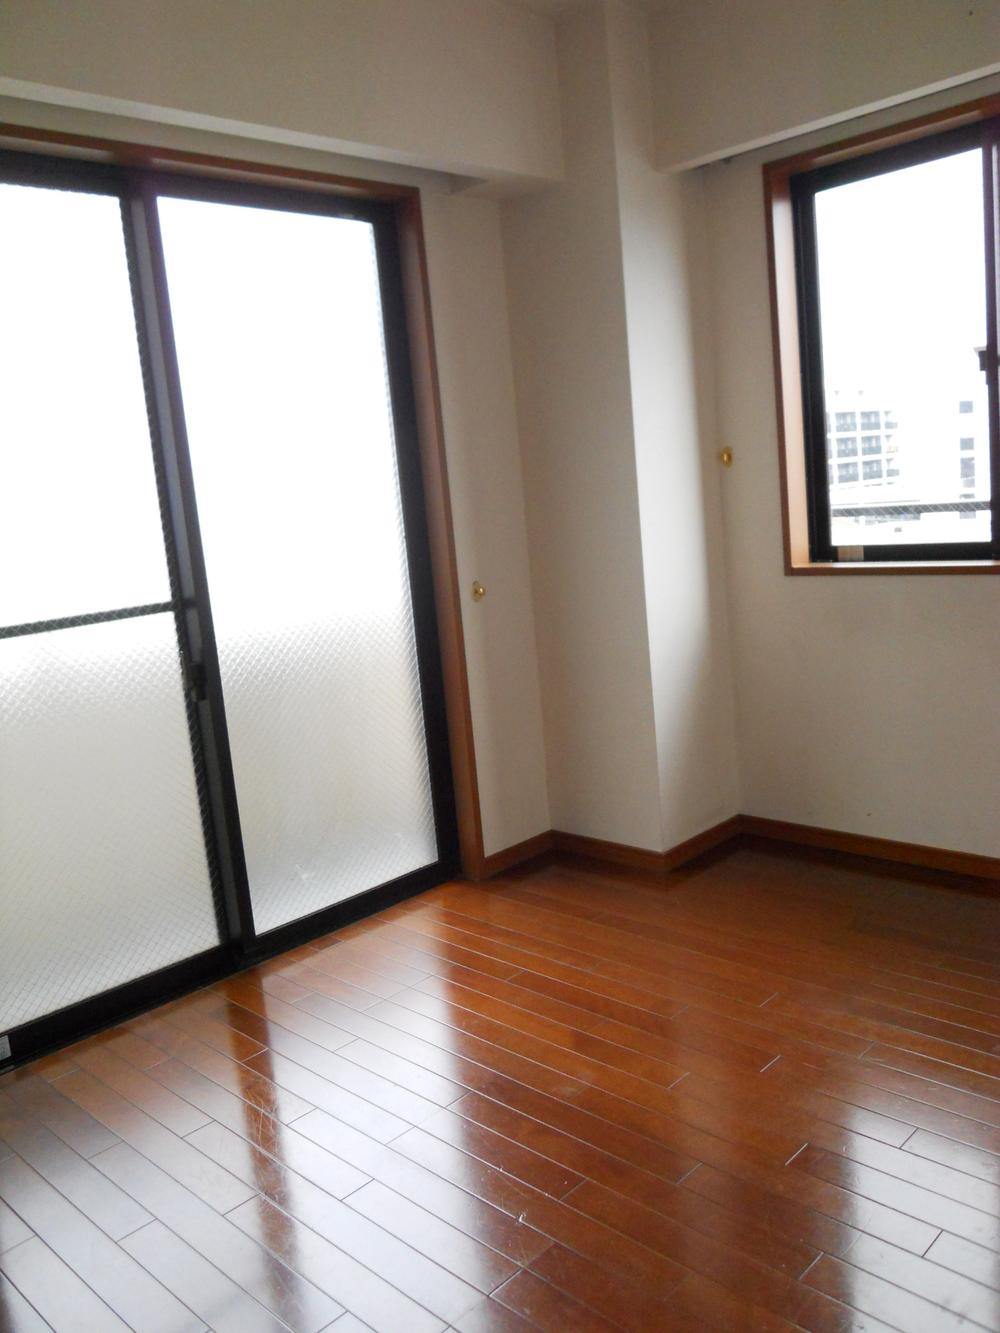 Non-living room. Western-style (about 5.5 tatami mats)